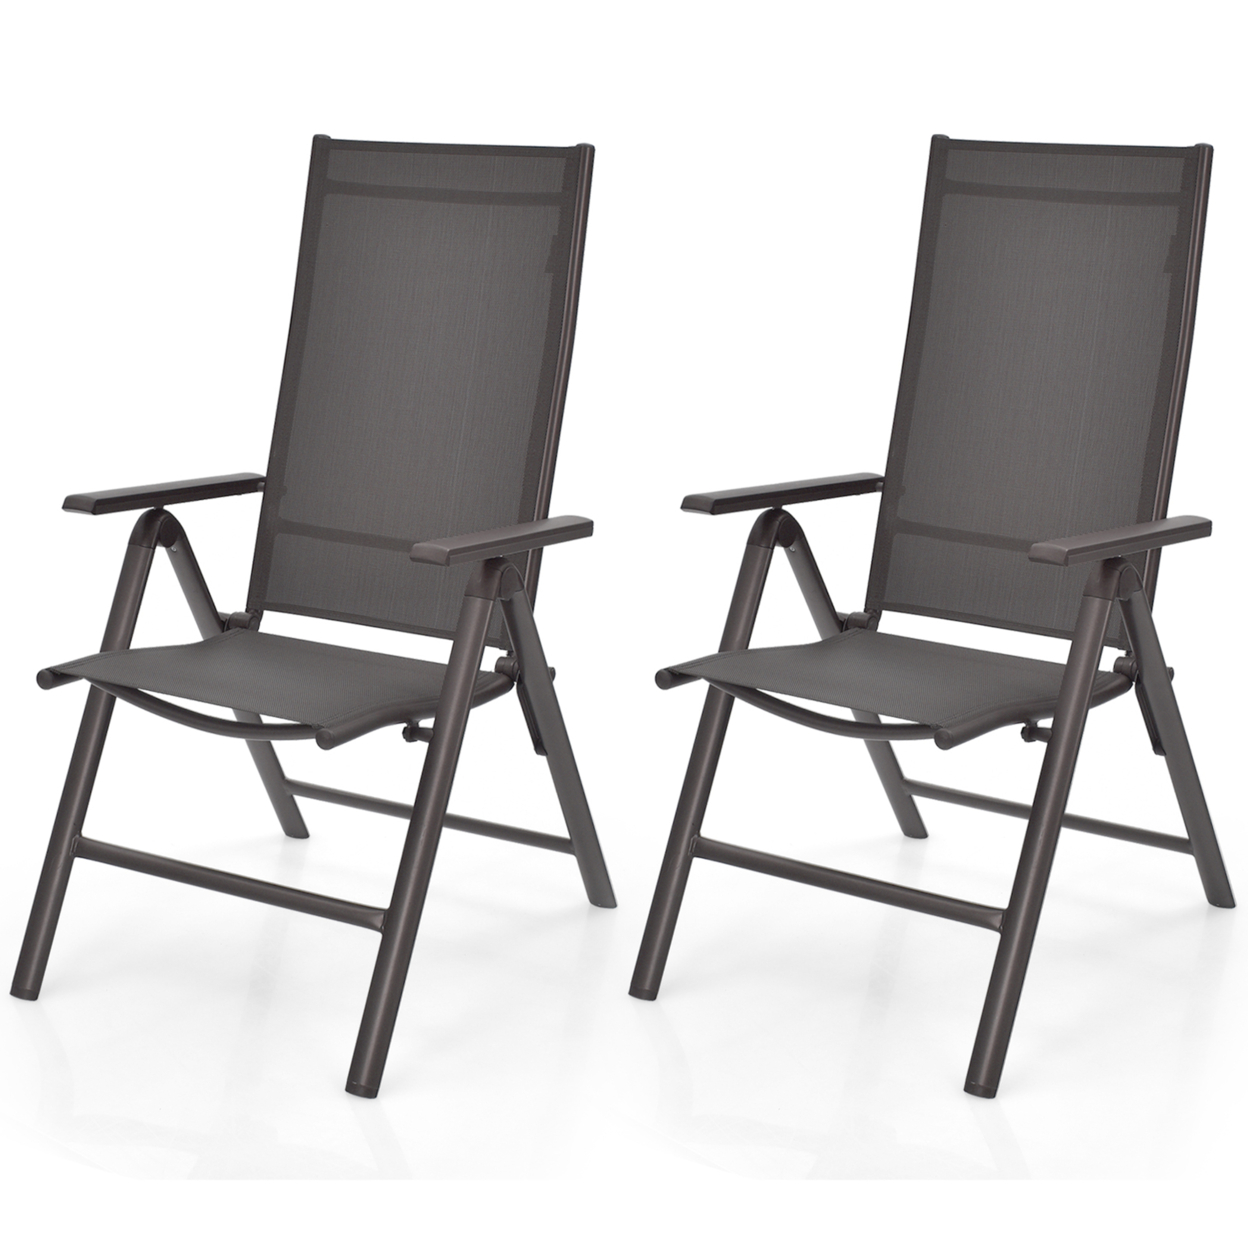 Set Of 2 Folding Patio Dining Chair Camping Chair W/ Adjustable Backrest